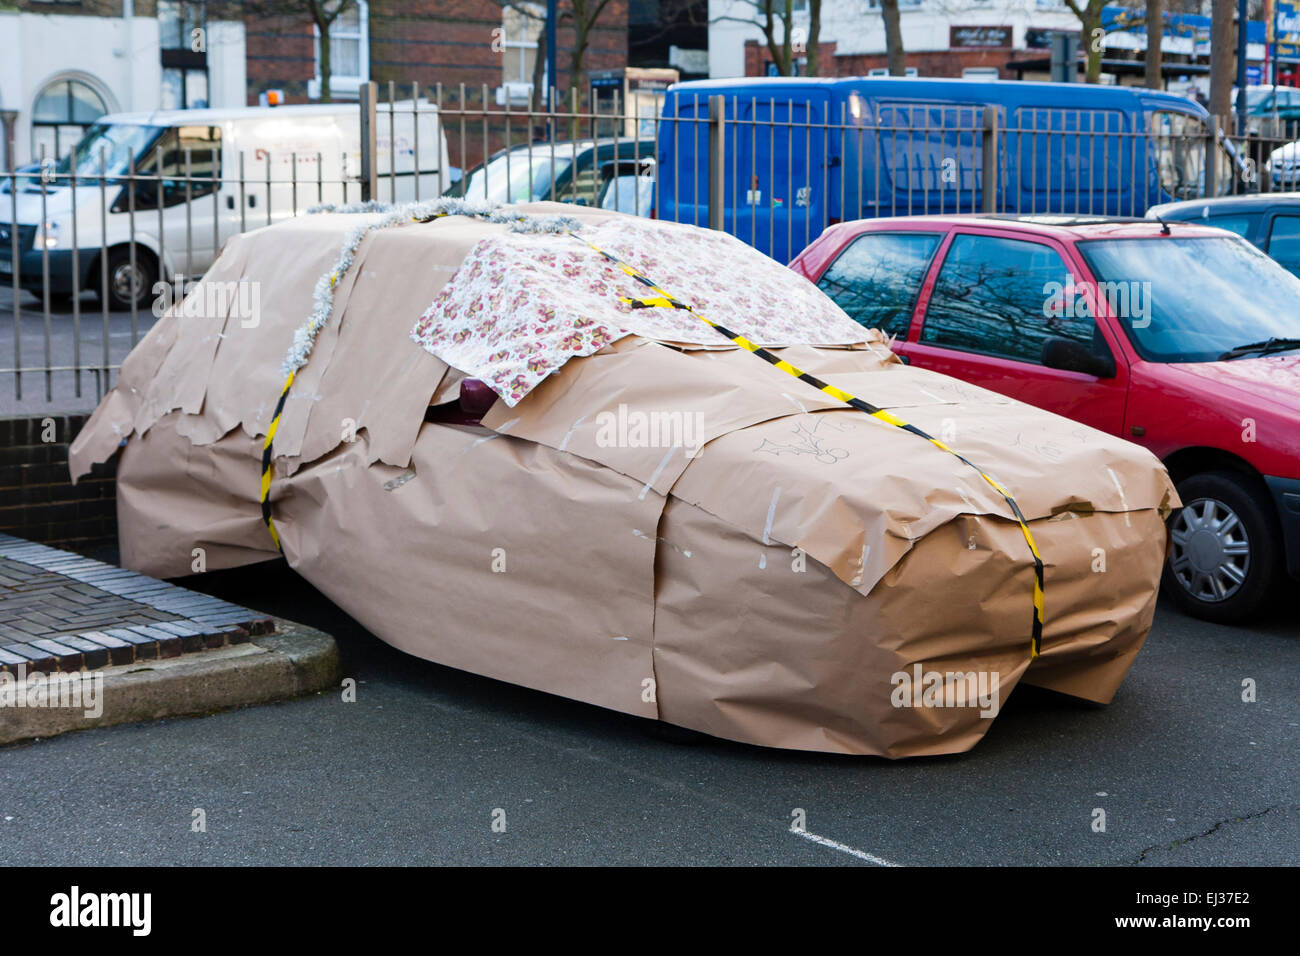 A car wrapped up in brown wrapping paper and black and yellow tape as a surprise secret Santa gift, parked in a car park. Stock Photo